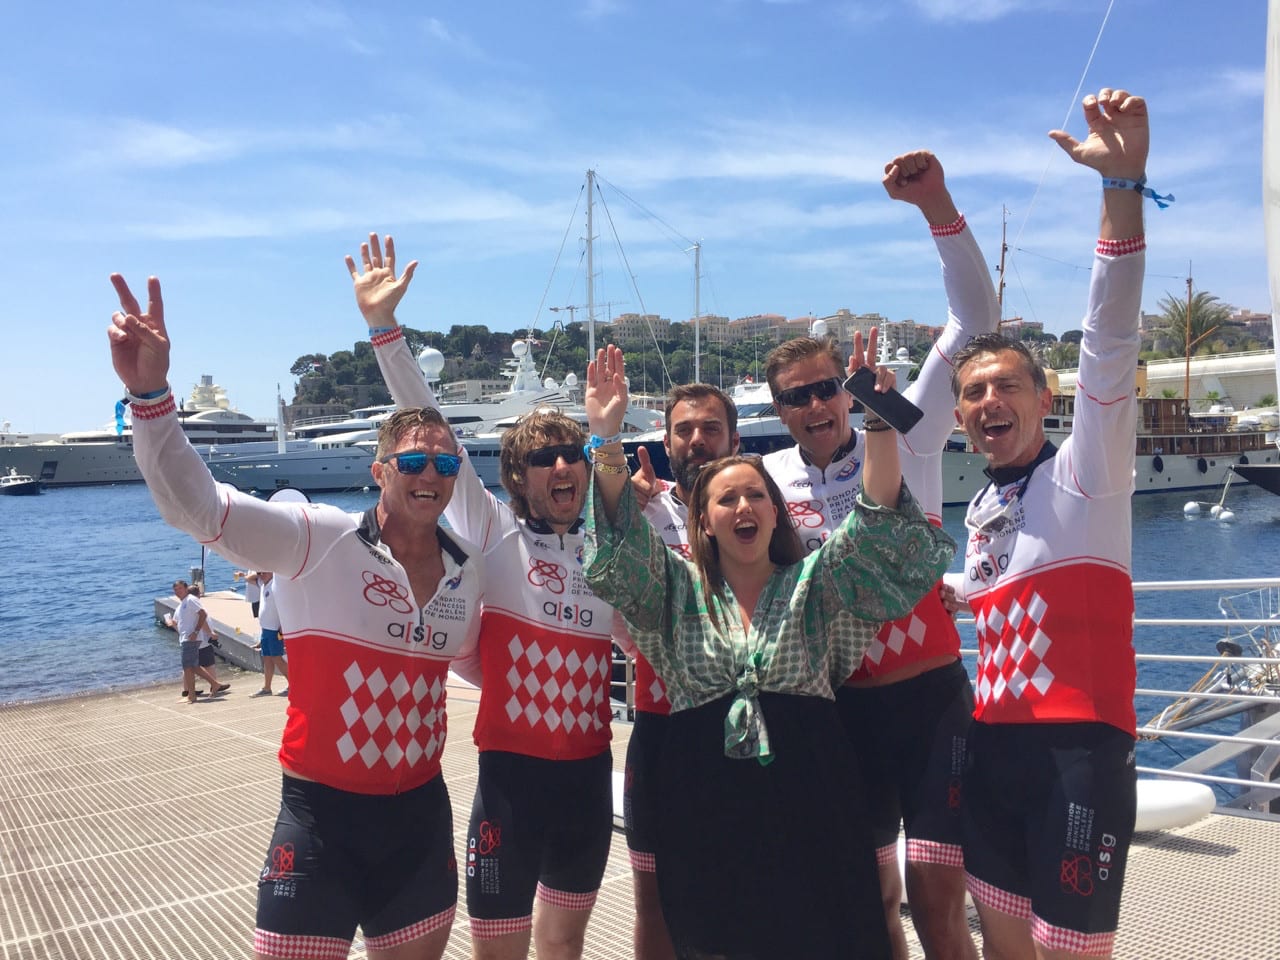 Ryk Neethling (second from right) and Percy Montgomery led team Fondation François-Xavier Mora to victory at the Riviera Water Bike Challenge on June 4. Photo: Eric Mathon/Palais Princier 